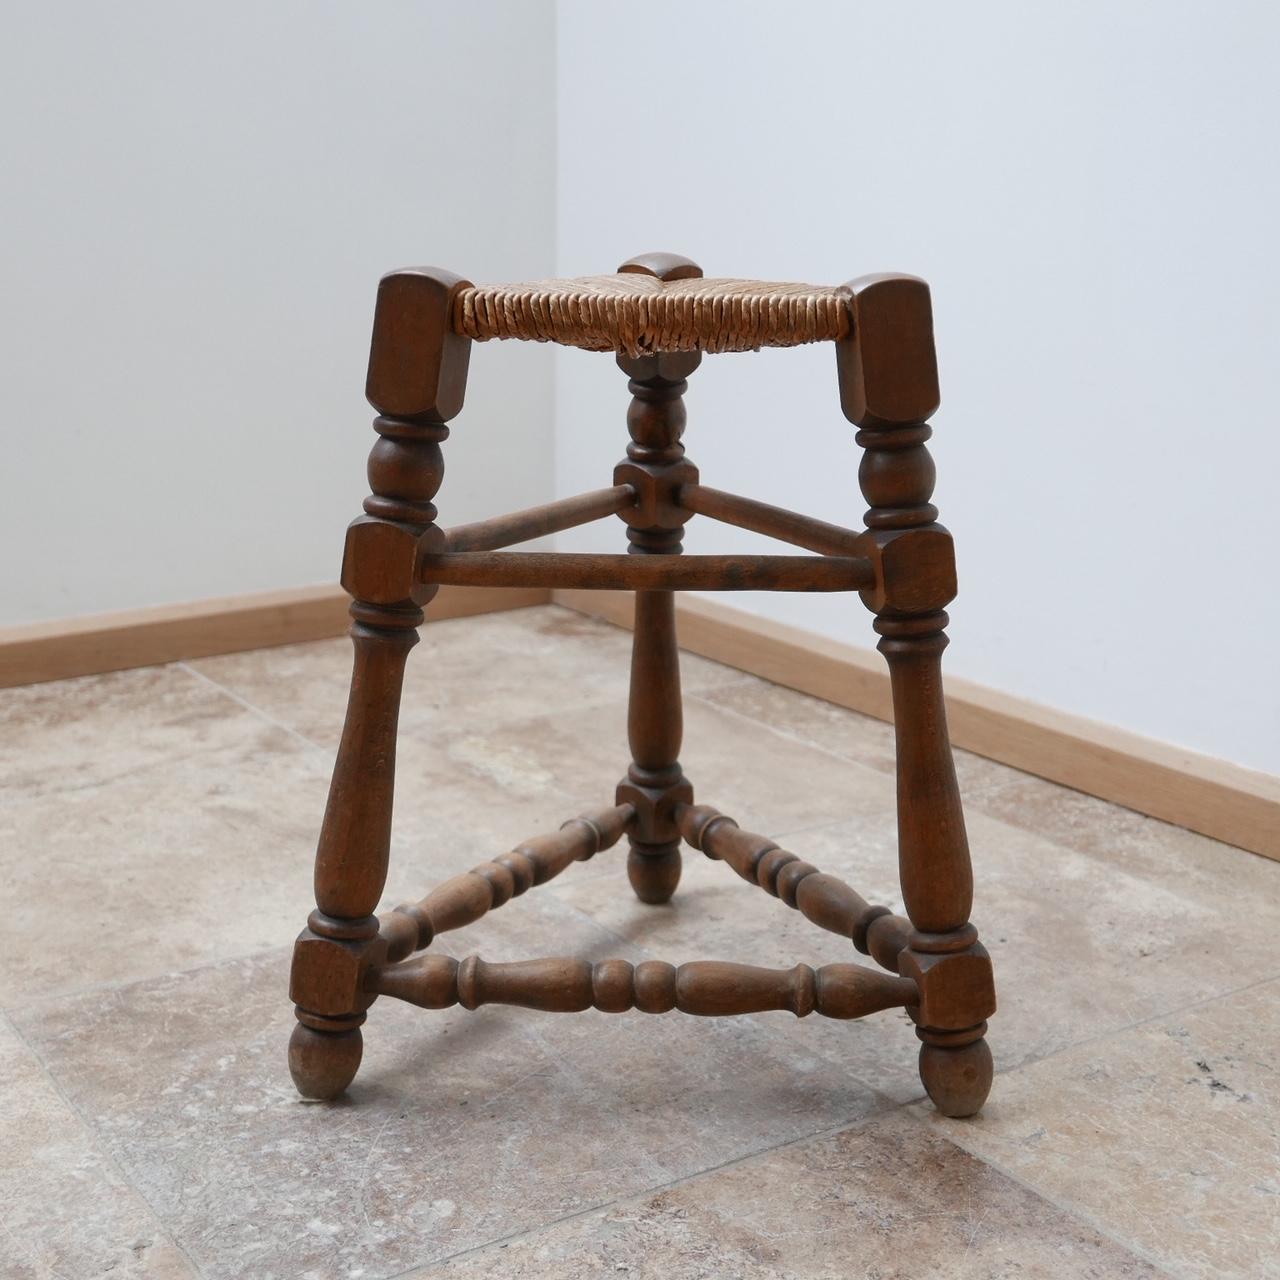 An unusual early to mid-20th century three legged stool. 

Turned oak or similar wood with a rush top in good condition. 

Sturdy and infinitely stylish. 

French in origin. 

Dimensions: 41 W x 41 D x 47 seat height x 27 width of top in cm.